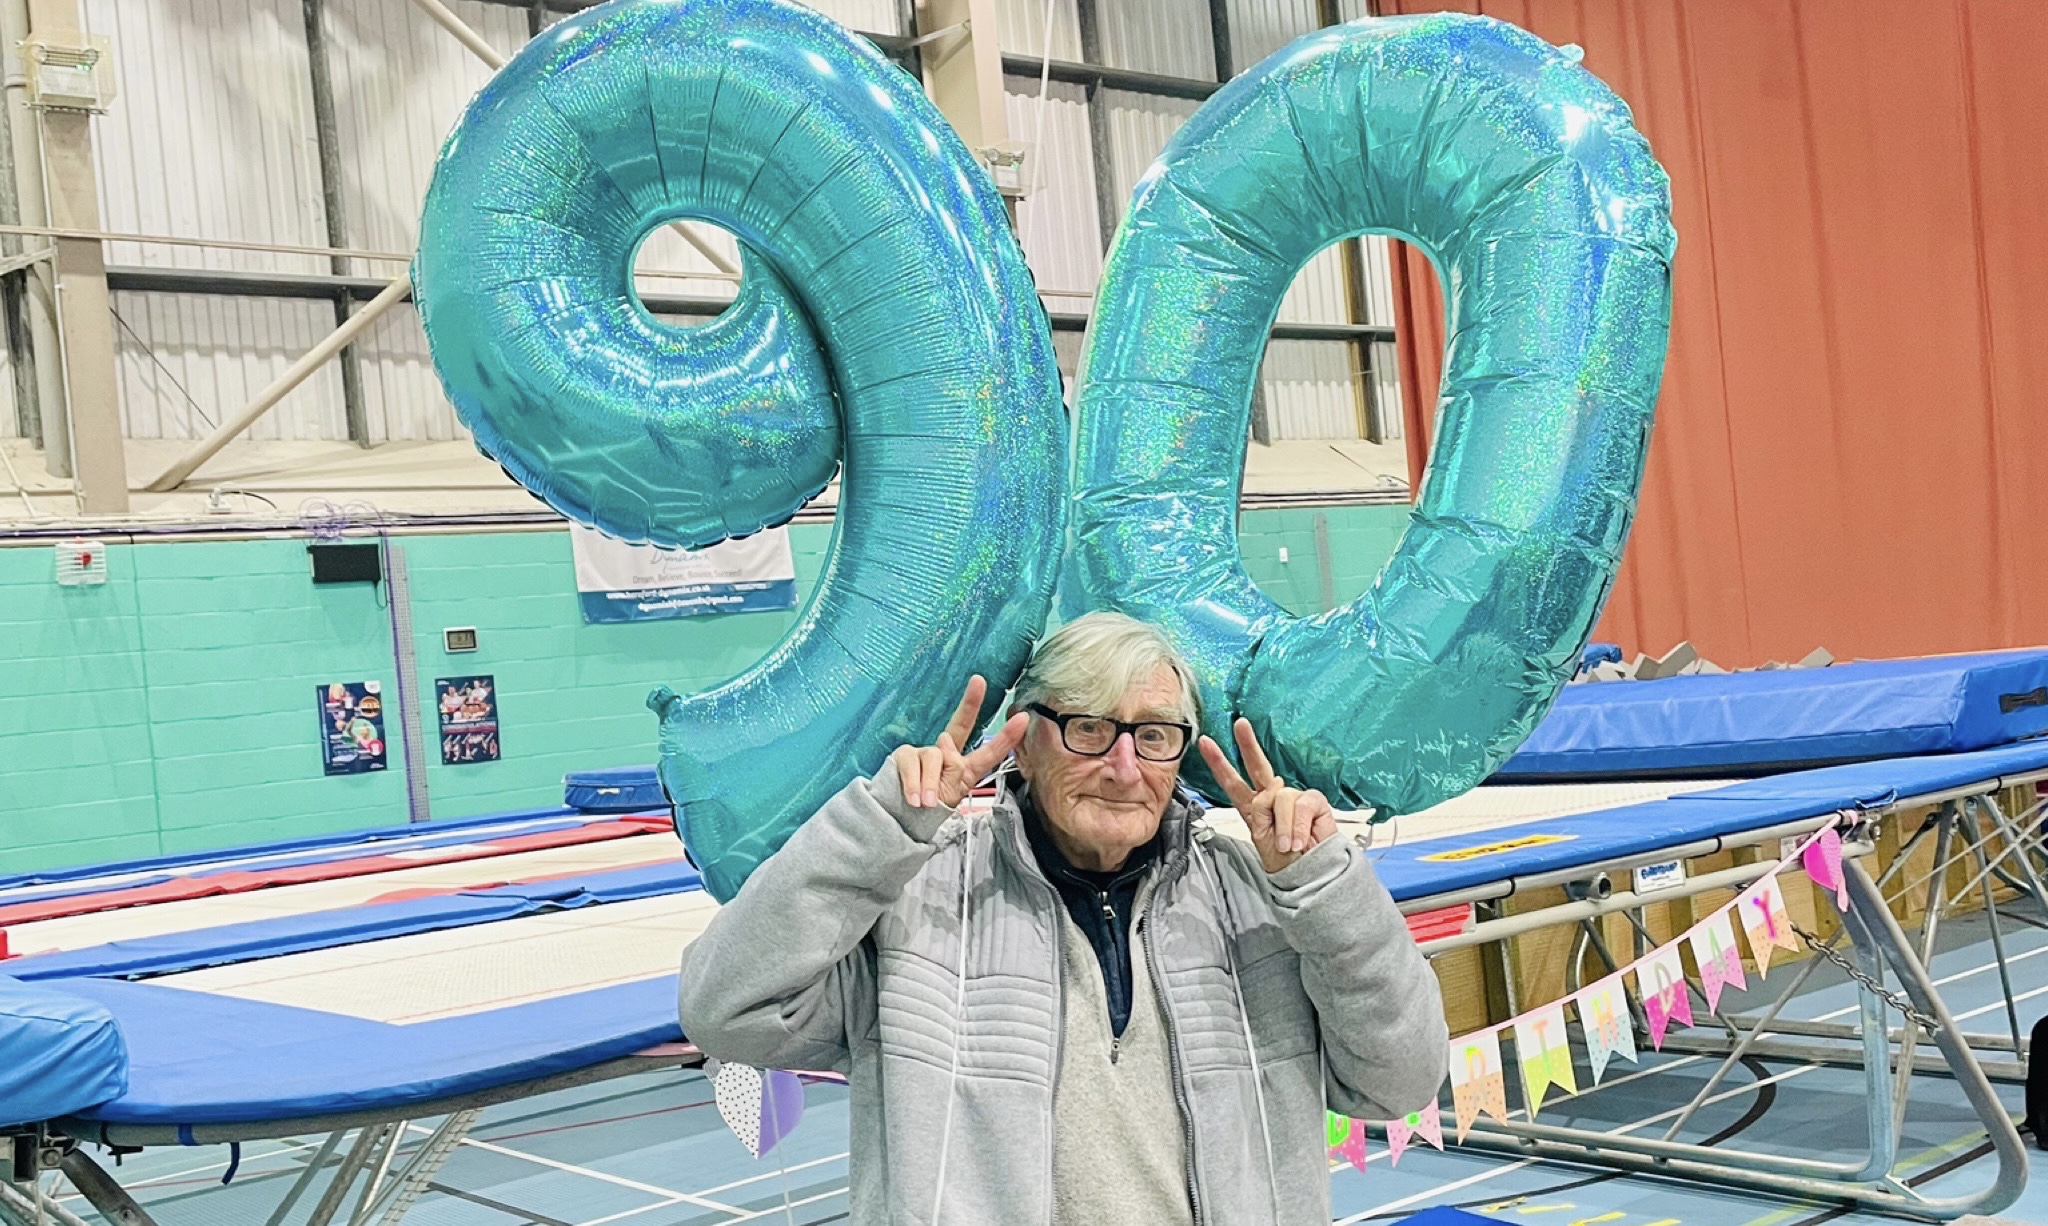 BIRTHDAY! | Tony Geraghty is 90 today and he still goes trampolining!